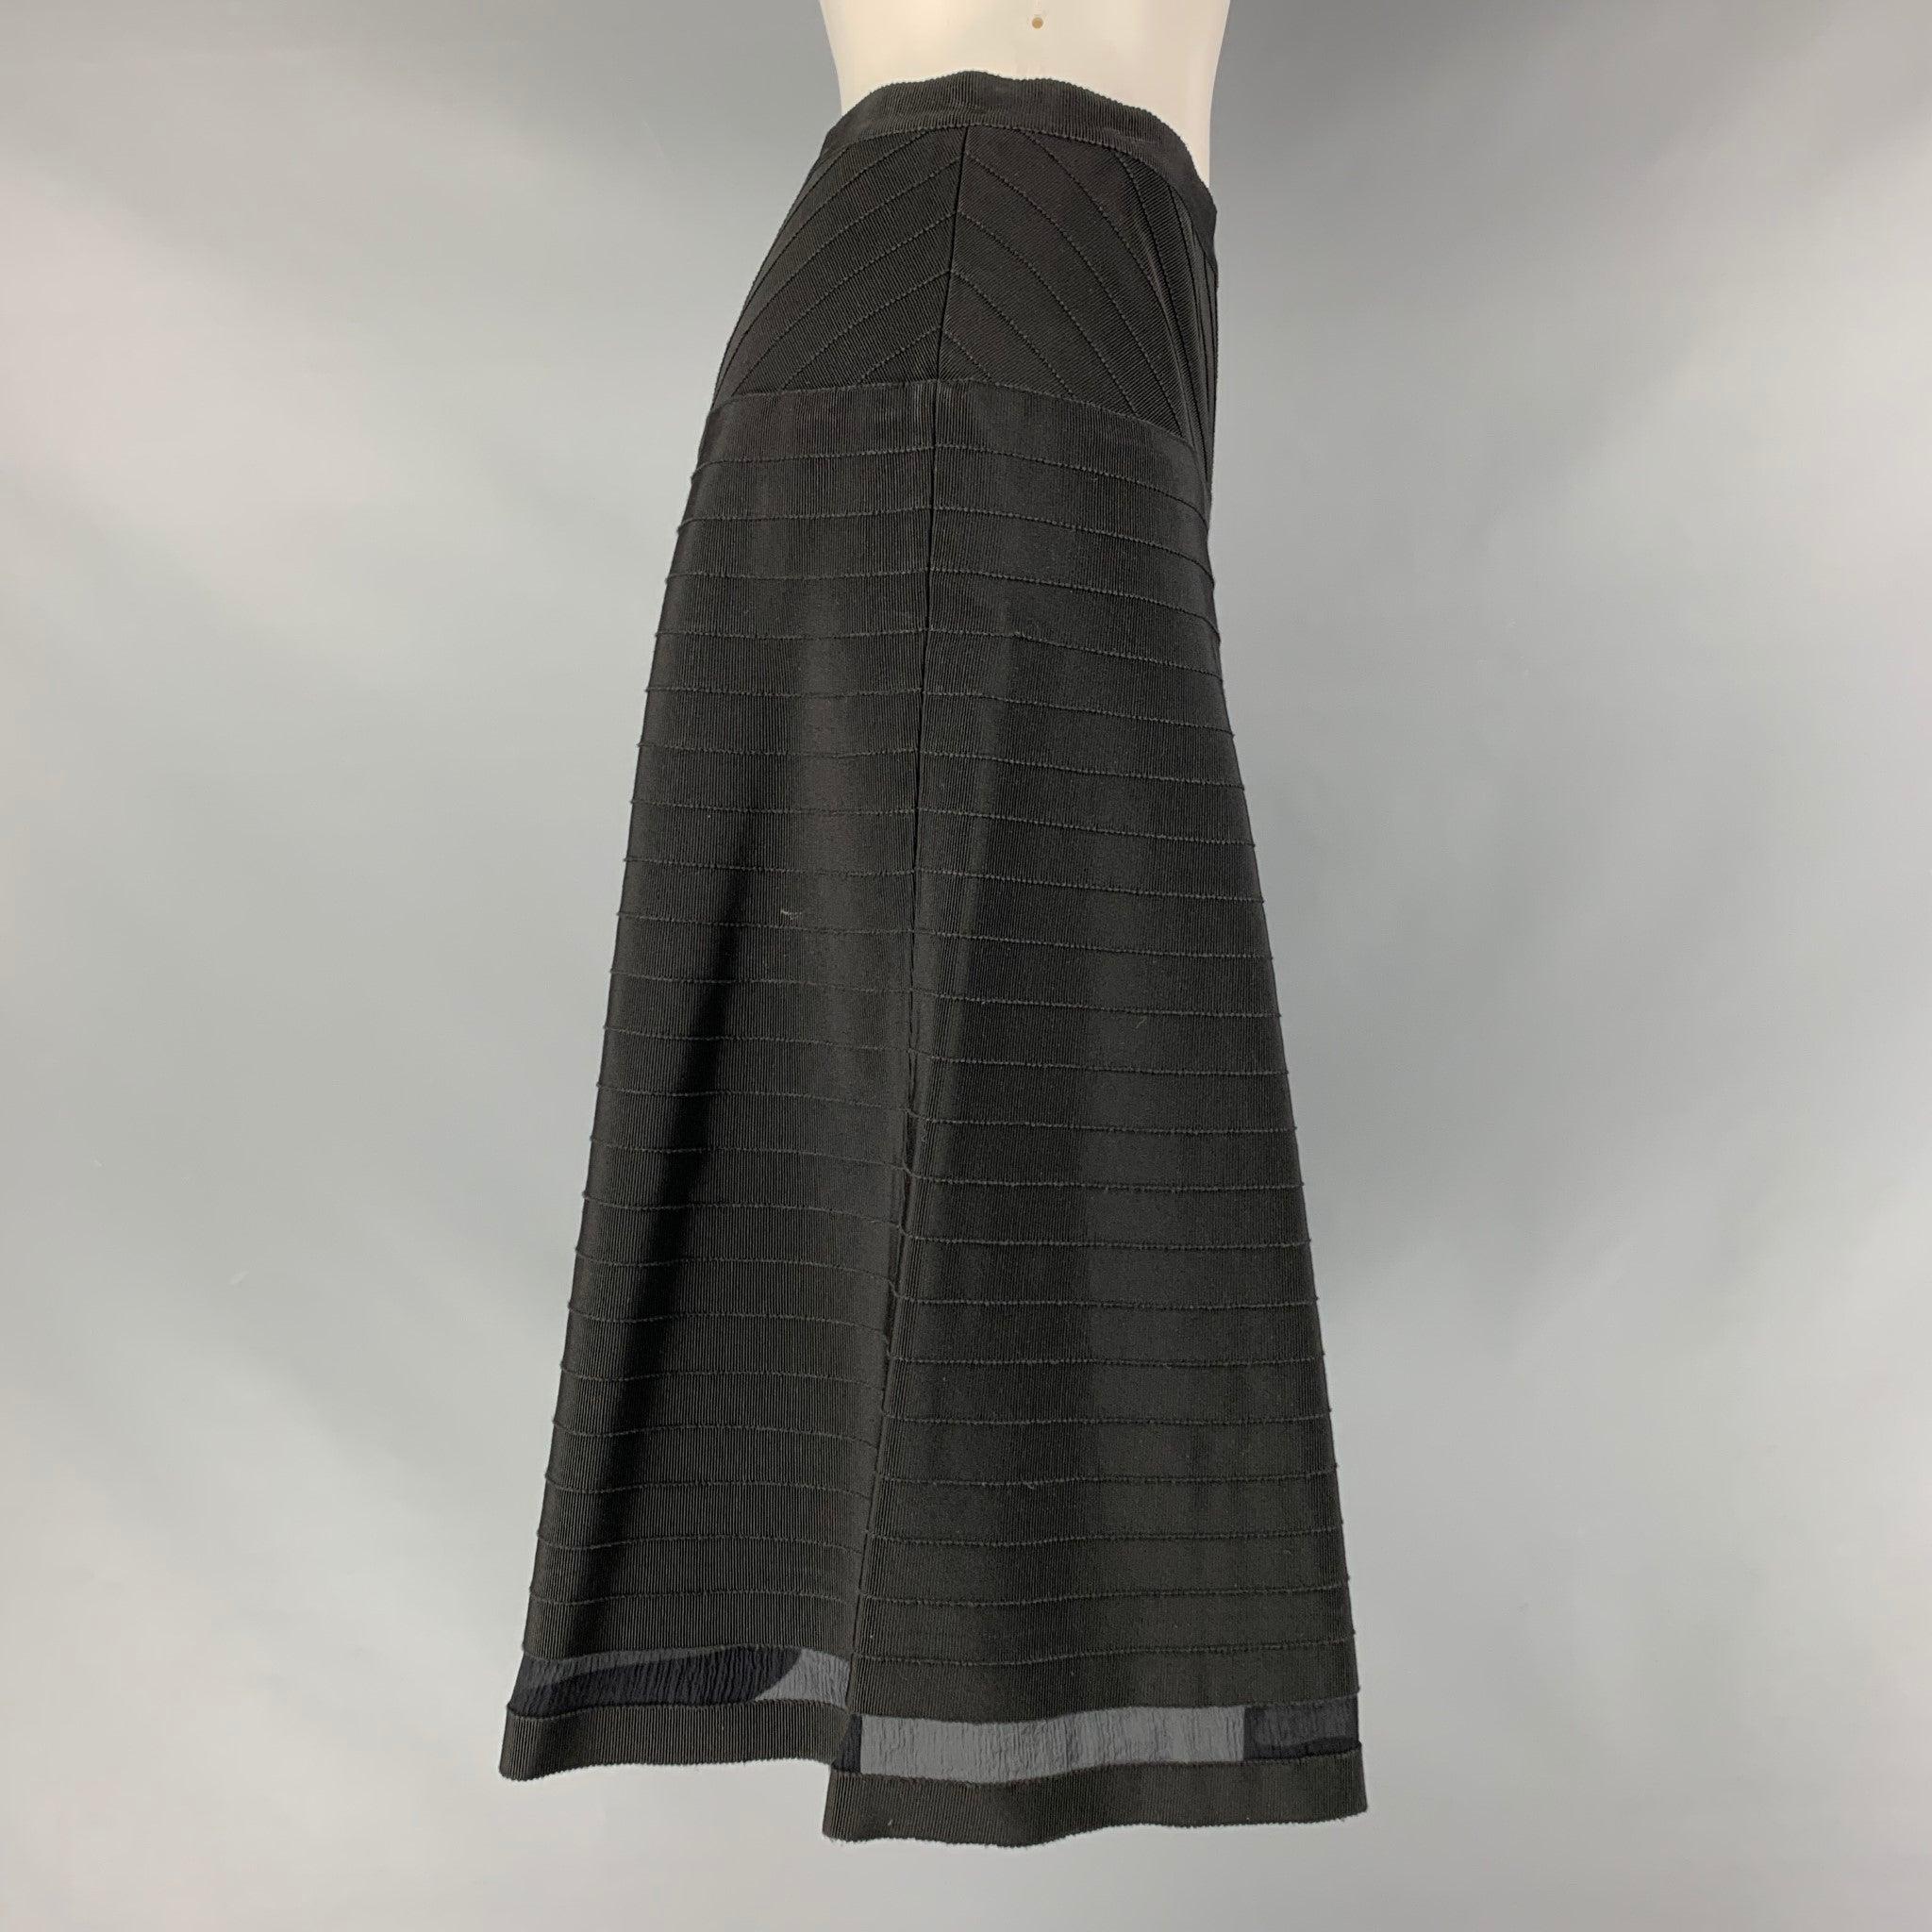 PRADA a-line skirt comes in a black cotton and viscose material featuring a rib texture and a side invisible zip up closure. Made in Italy. Very Good Pre-Owned Condition. Minor mark at back. 

Marked:   38 

Measurements: 
  Waist: 27 inches Hip: 36